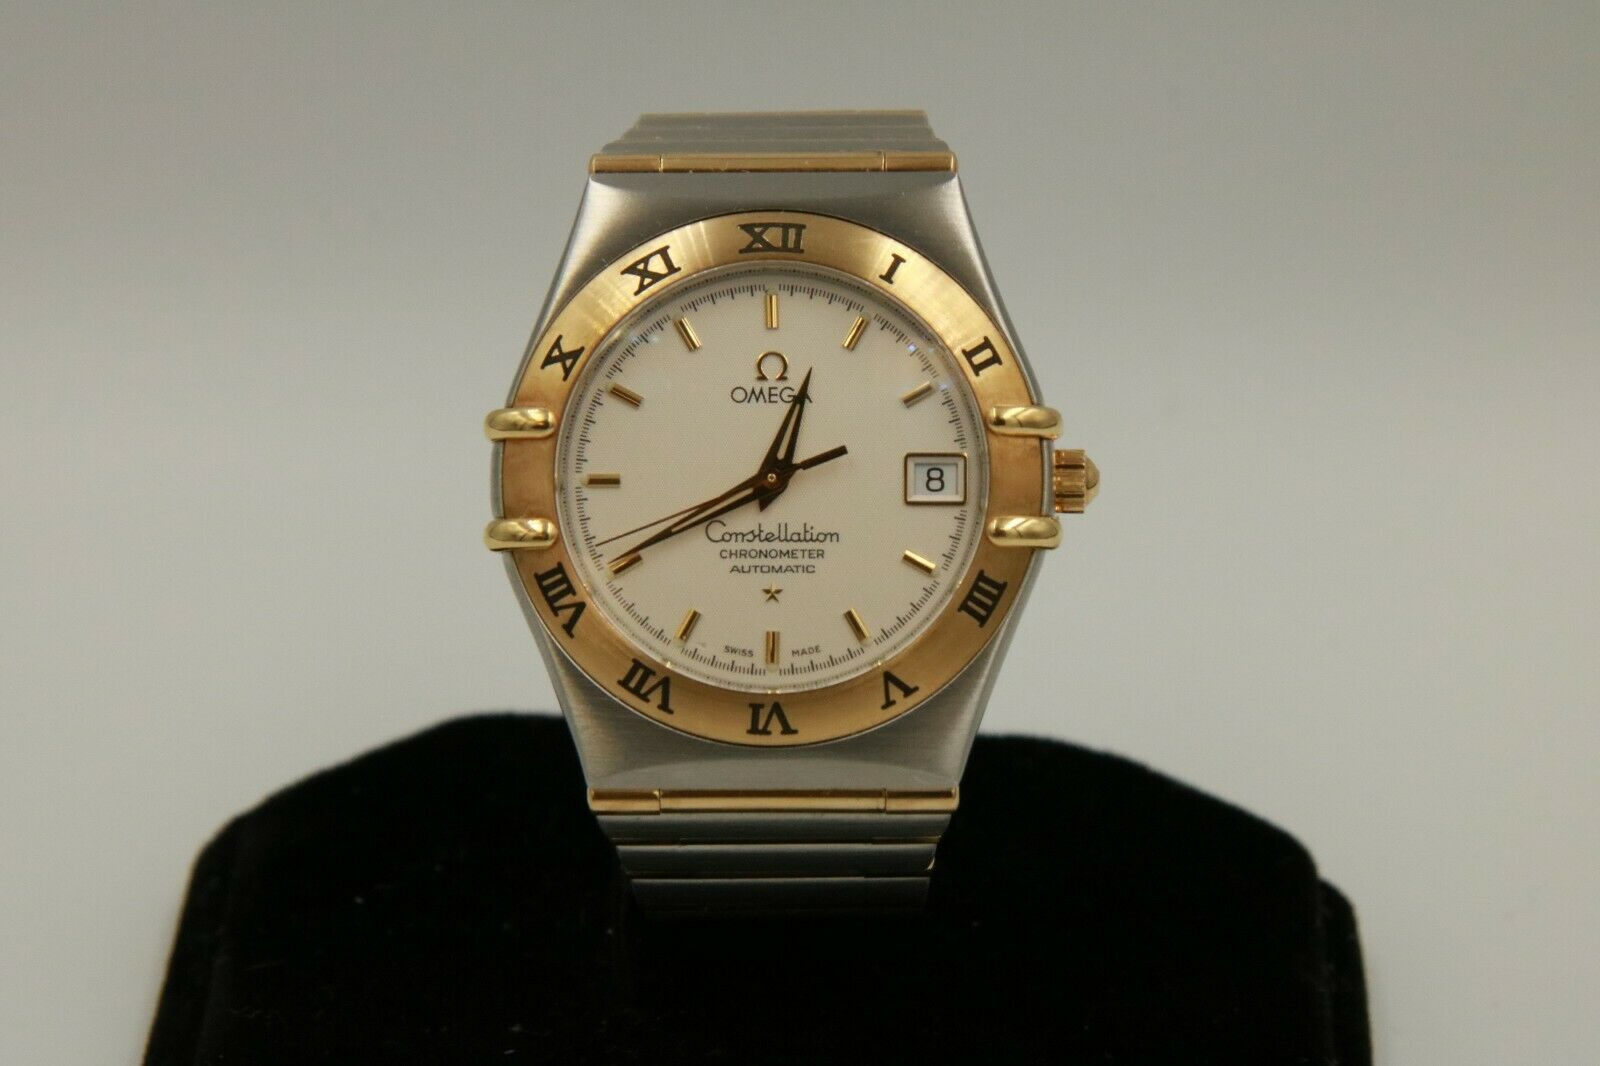 1551 861 TWO TONE STAINLESS STEEL 